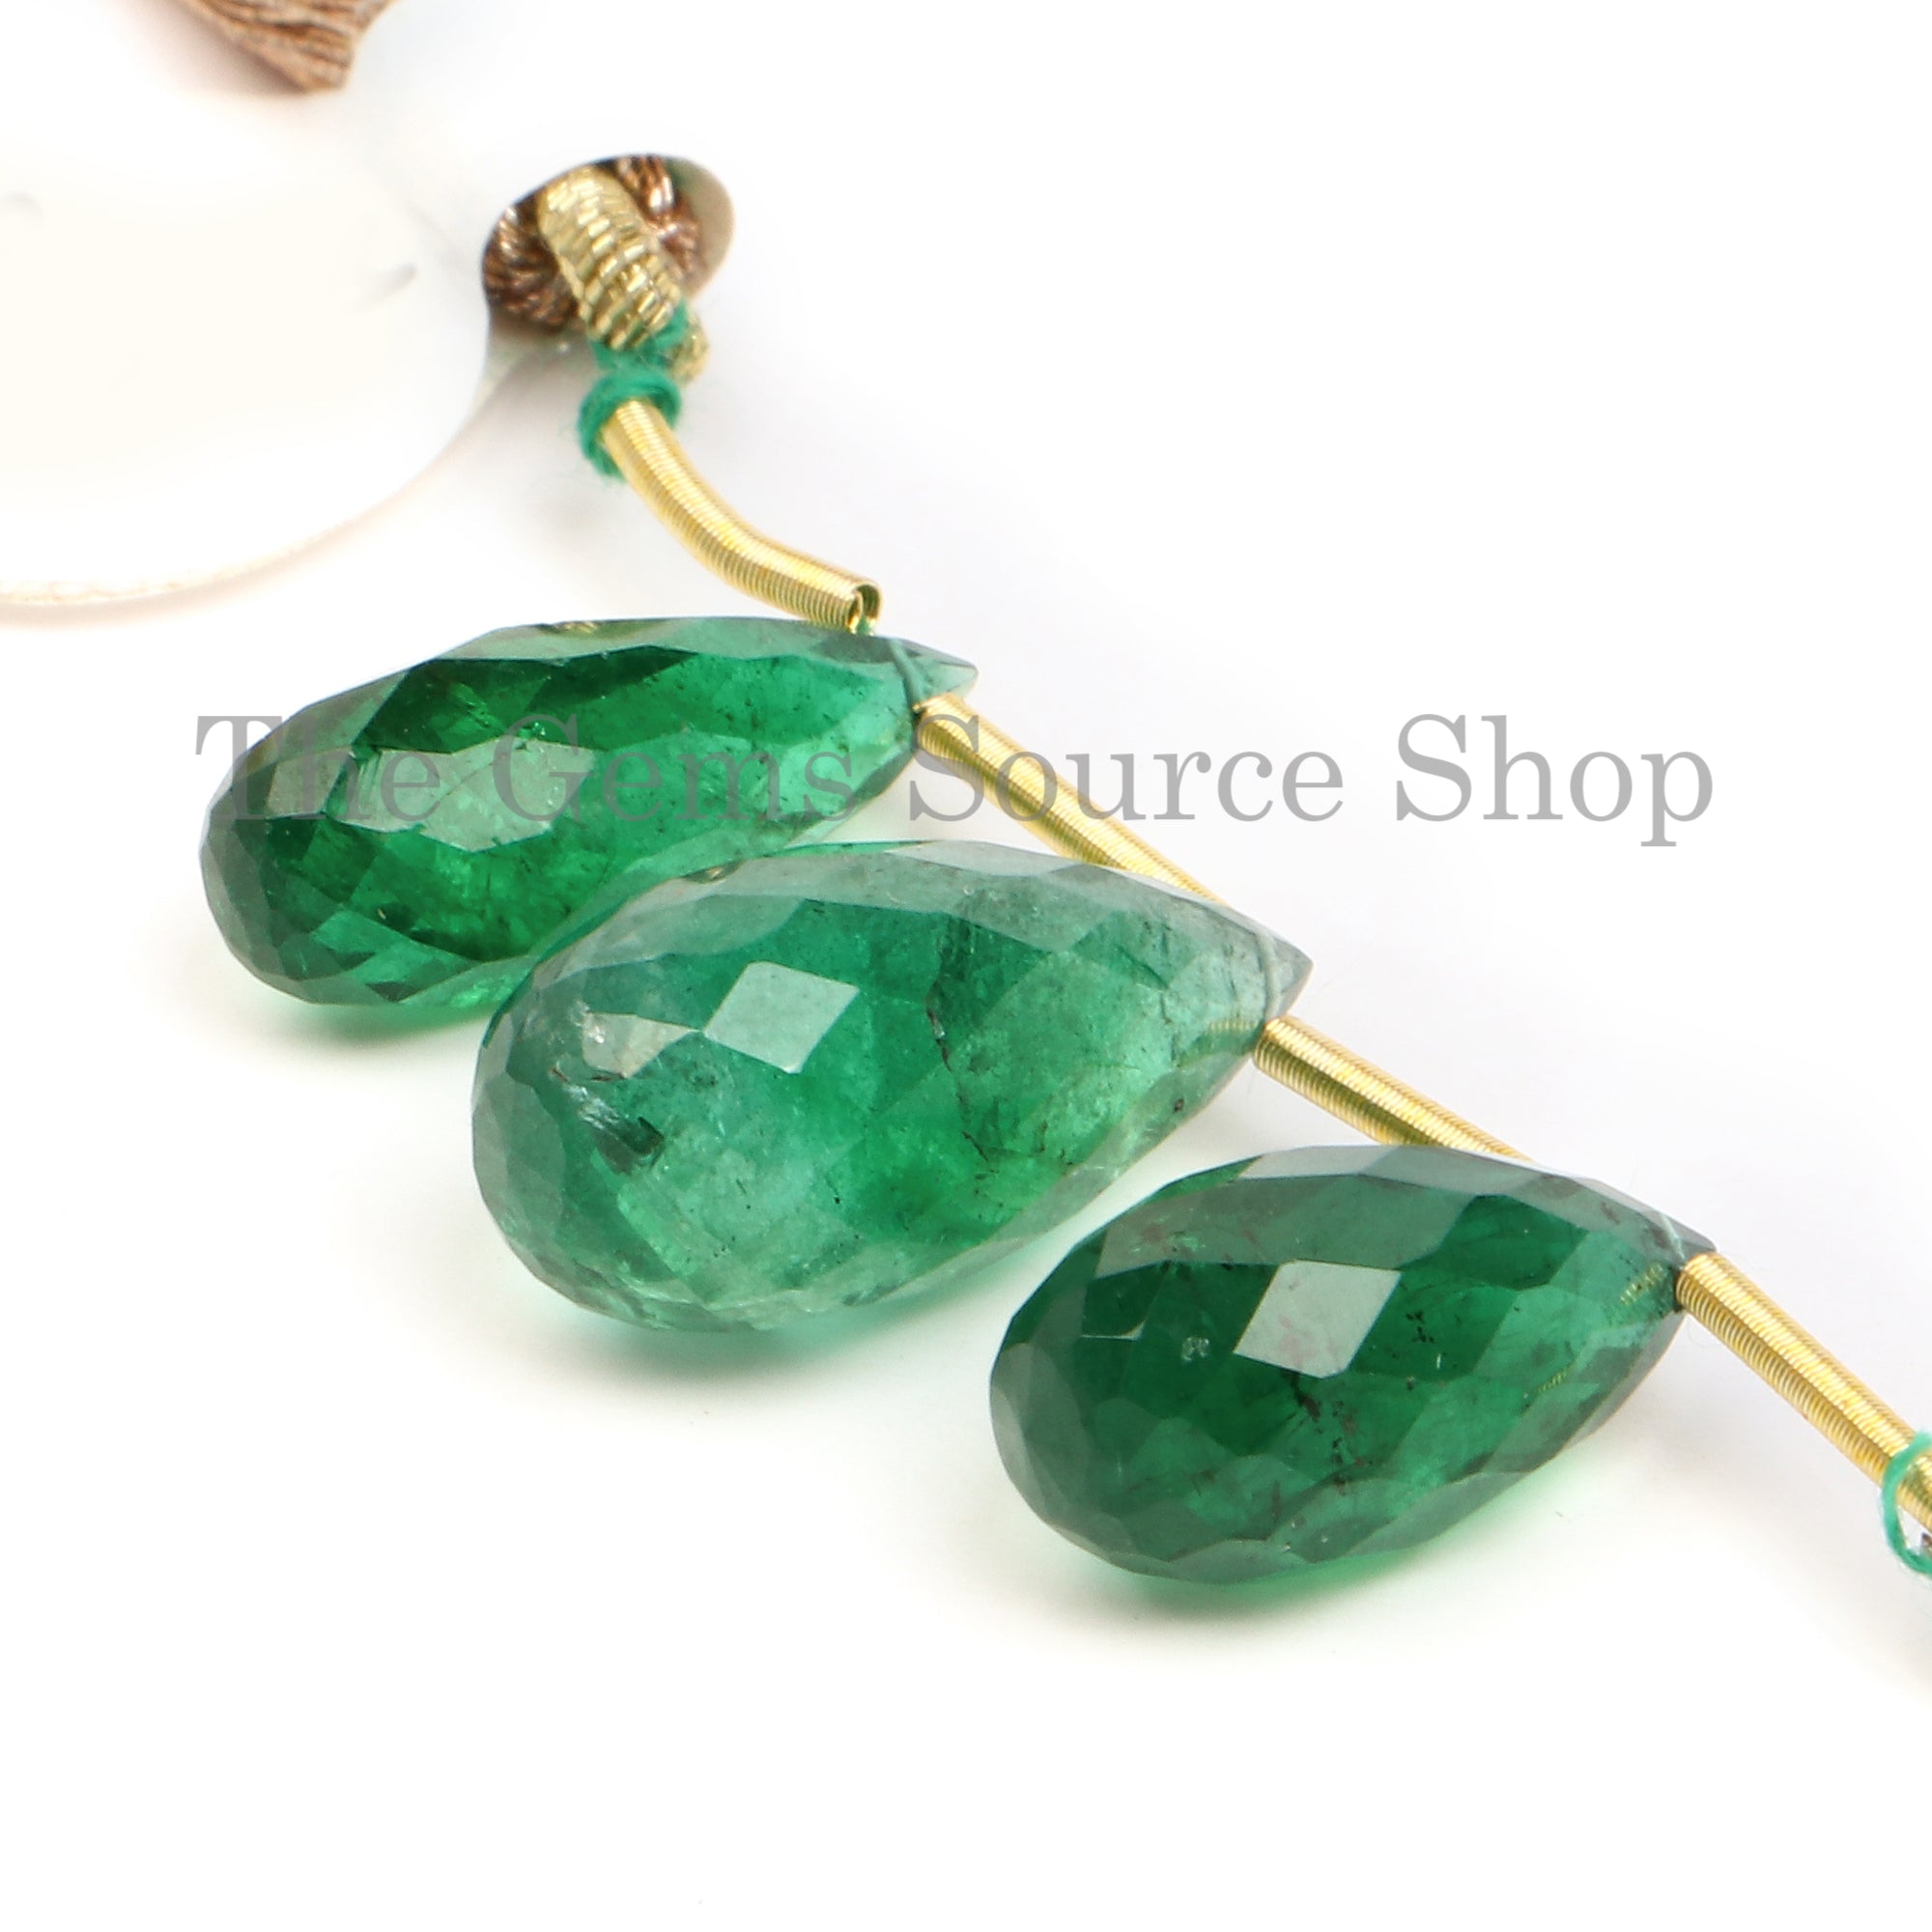 Super Top Quality Natural Emerald Beads, Faceted Drop Beads, Gemstone Tear Drop Briolette